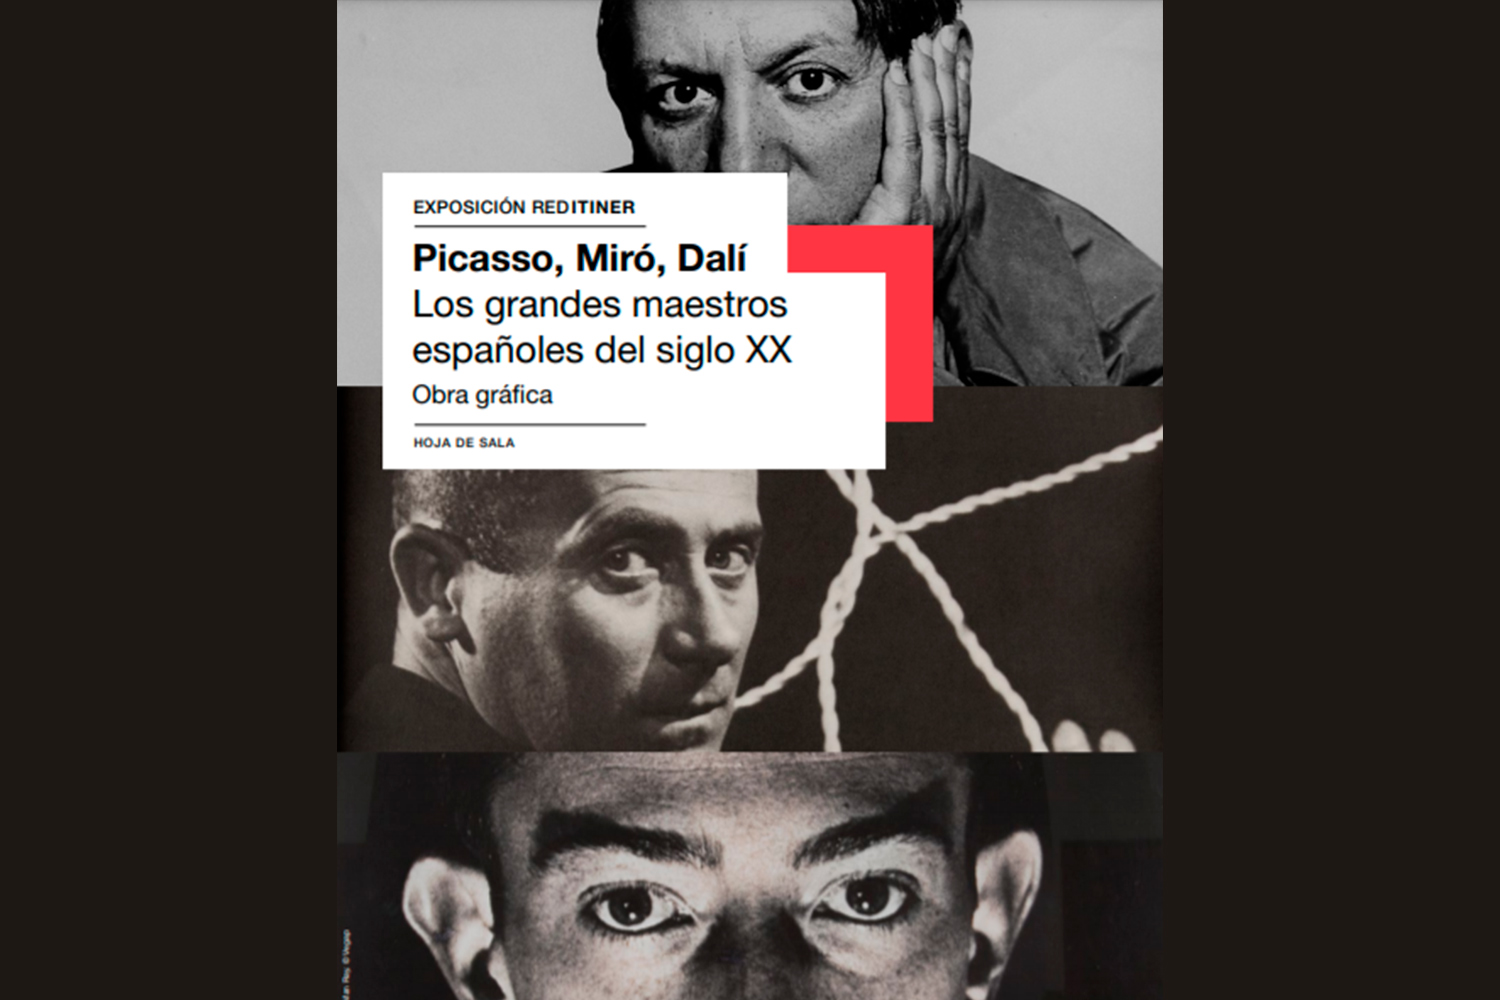 Exhibition "Picasso, Miró, Dalí. Great masters of the 20th century" poster.